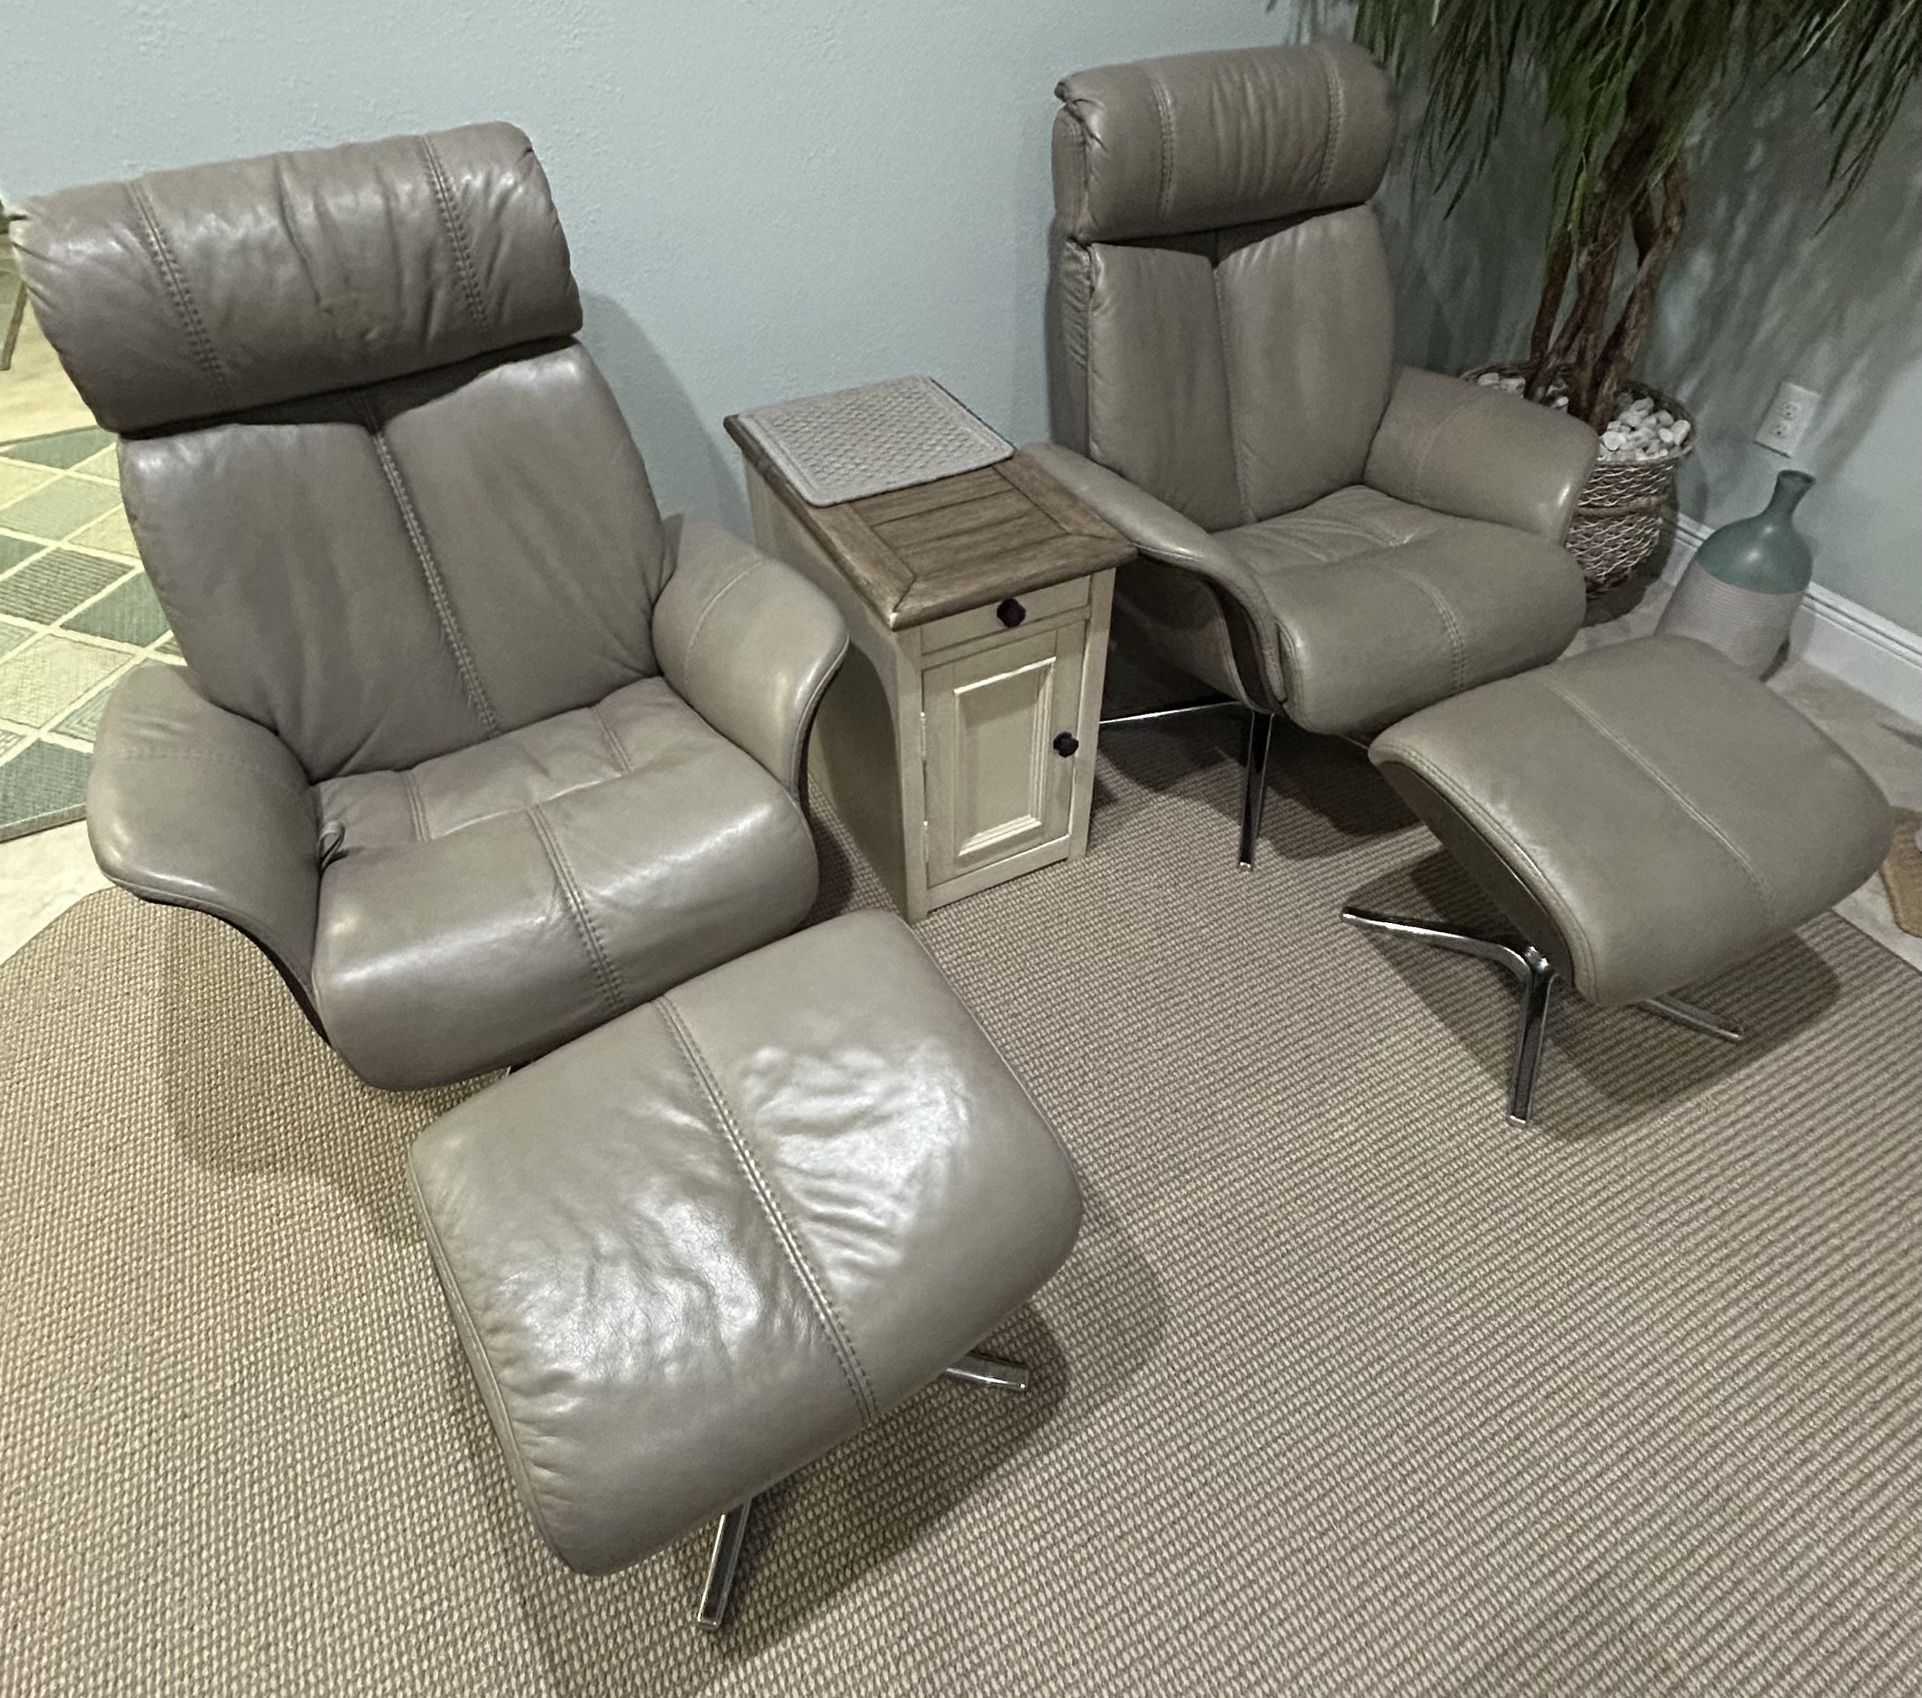 Leather Recliner and Ottoman 4-piece set